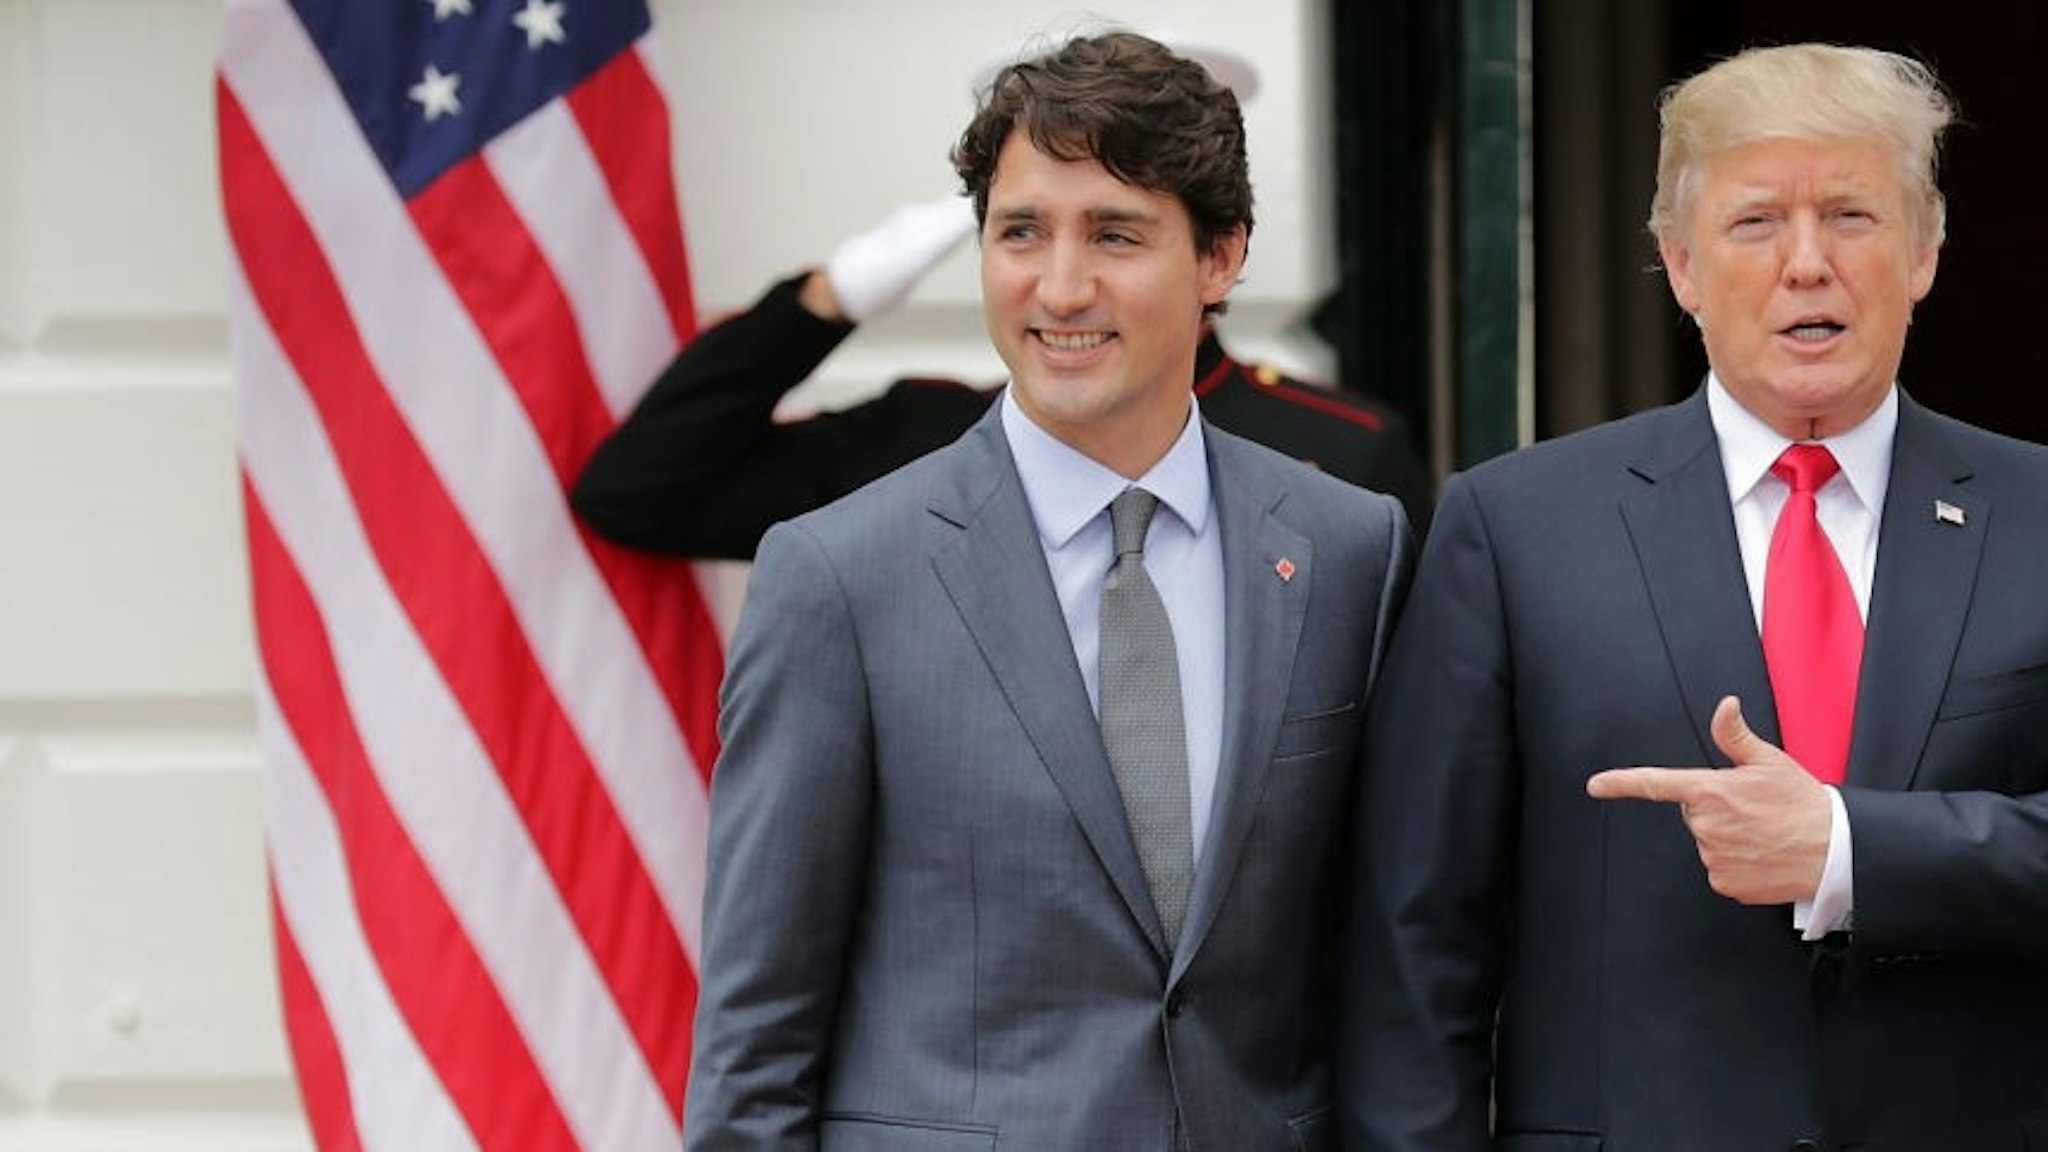 Canadian Prime Minister Justin Trudeau (L) and U.S. President Donald Trump pose for photographs at the White House October 11, 2017 in Washington, DC. The United States, Canada and Mexico are currently engaged in renegotiating the 25-year-old North American Free Trade Agreement